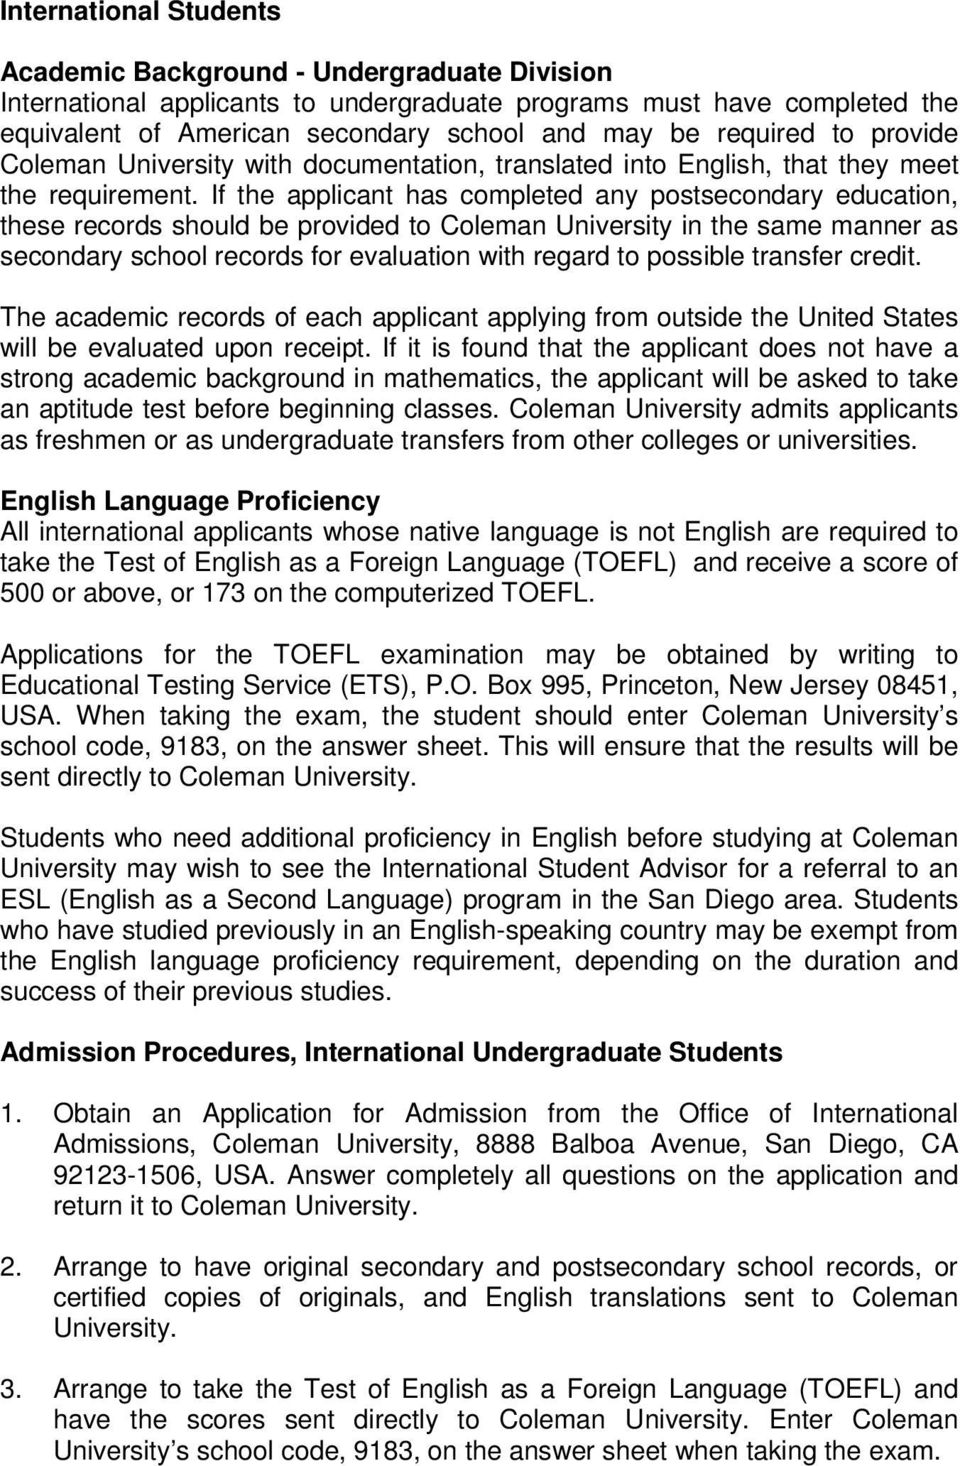 If the applicant has completed any postsecondary education, these records should be provided to Coleman University in the same manner as secondary school records for evaluation with regard to